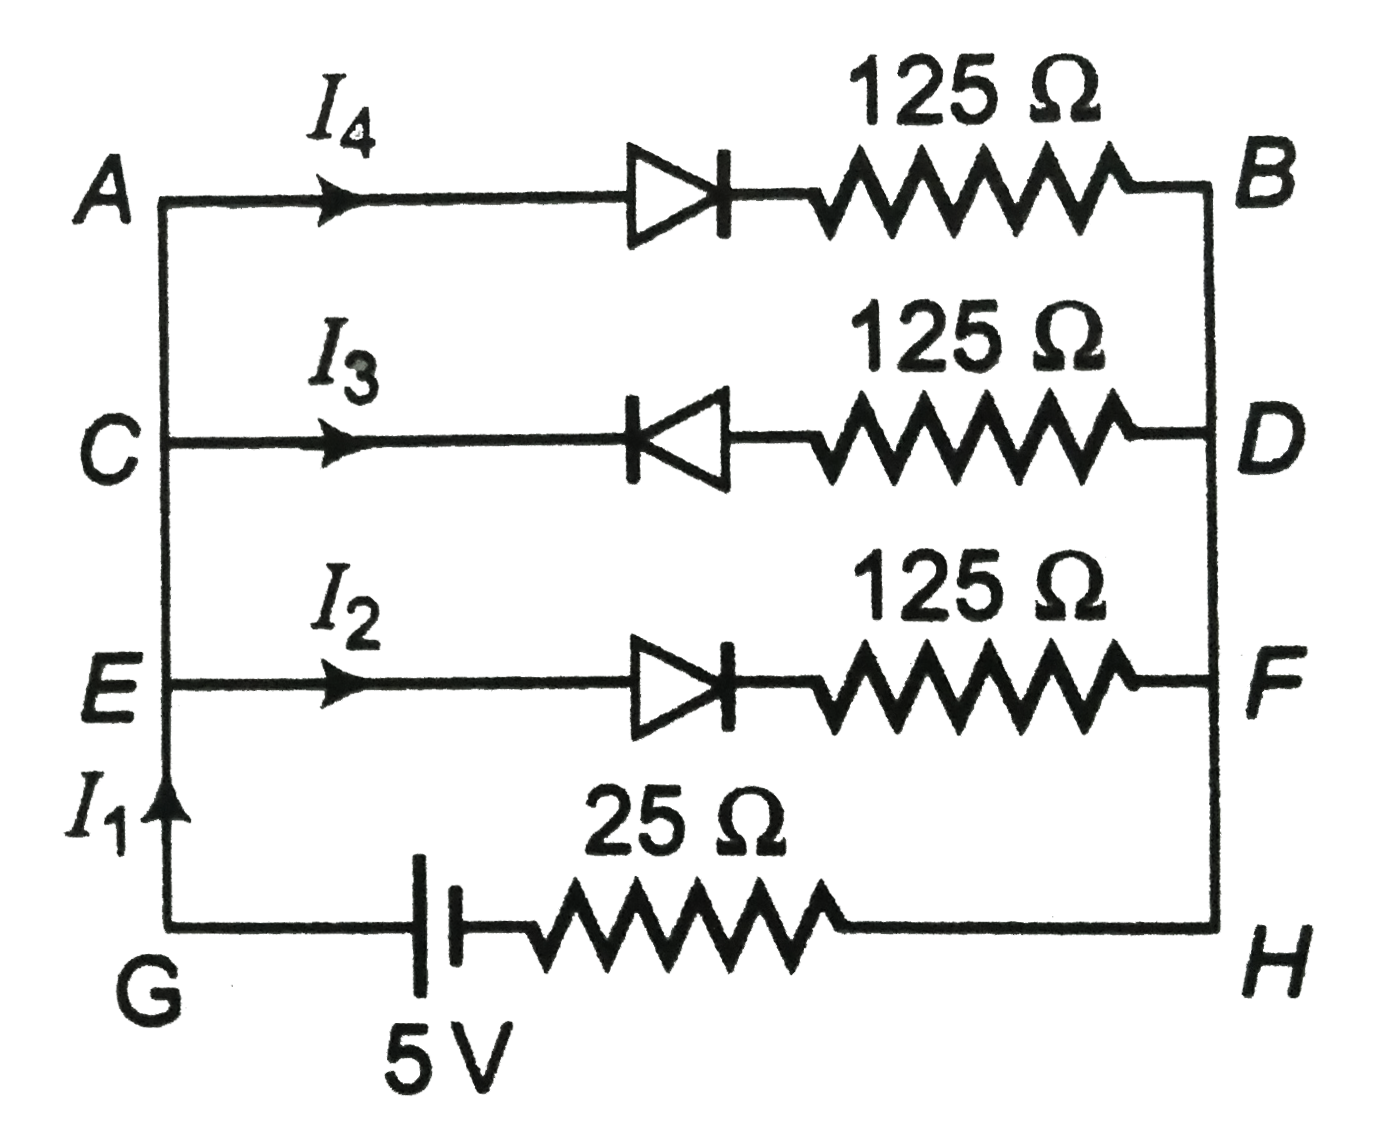 If each diode in figure has a forward has a forward bias resistance of 25 Omega and infinite resistance in reverse bias, what will be the values of  the current  I1 , I2 , I3 and I4?